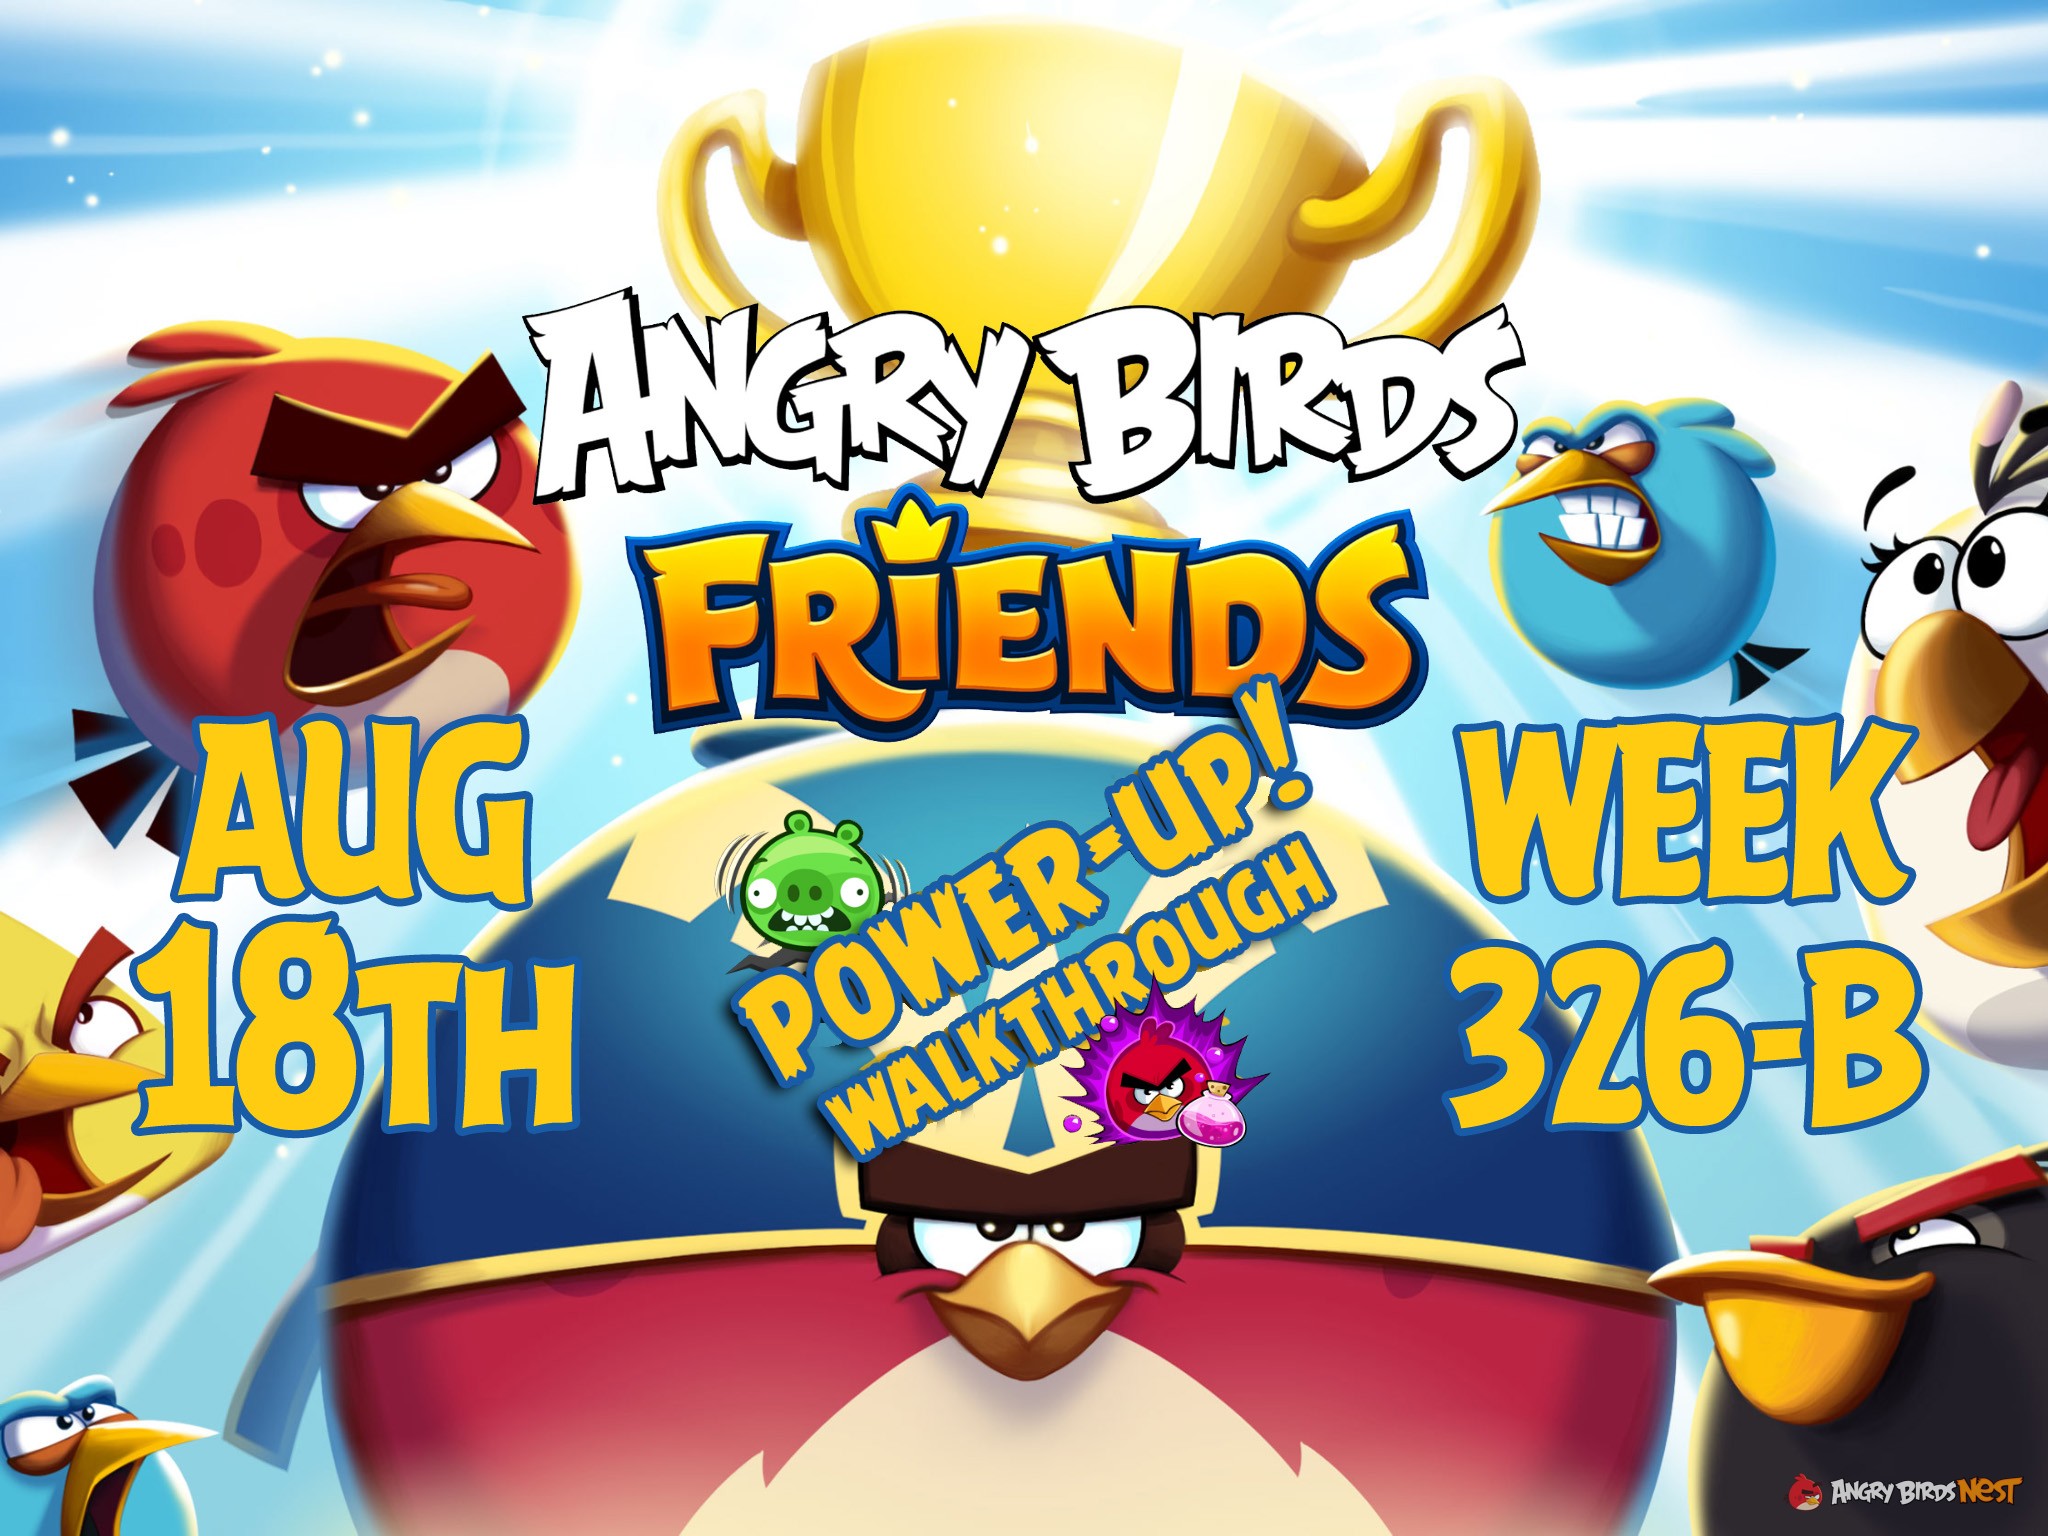 Angry-Birds-Friends-Tournament-Week-326-B-Feature-Image-PU